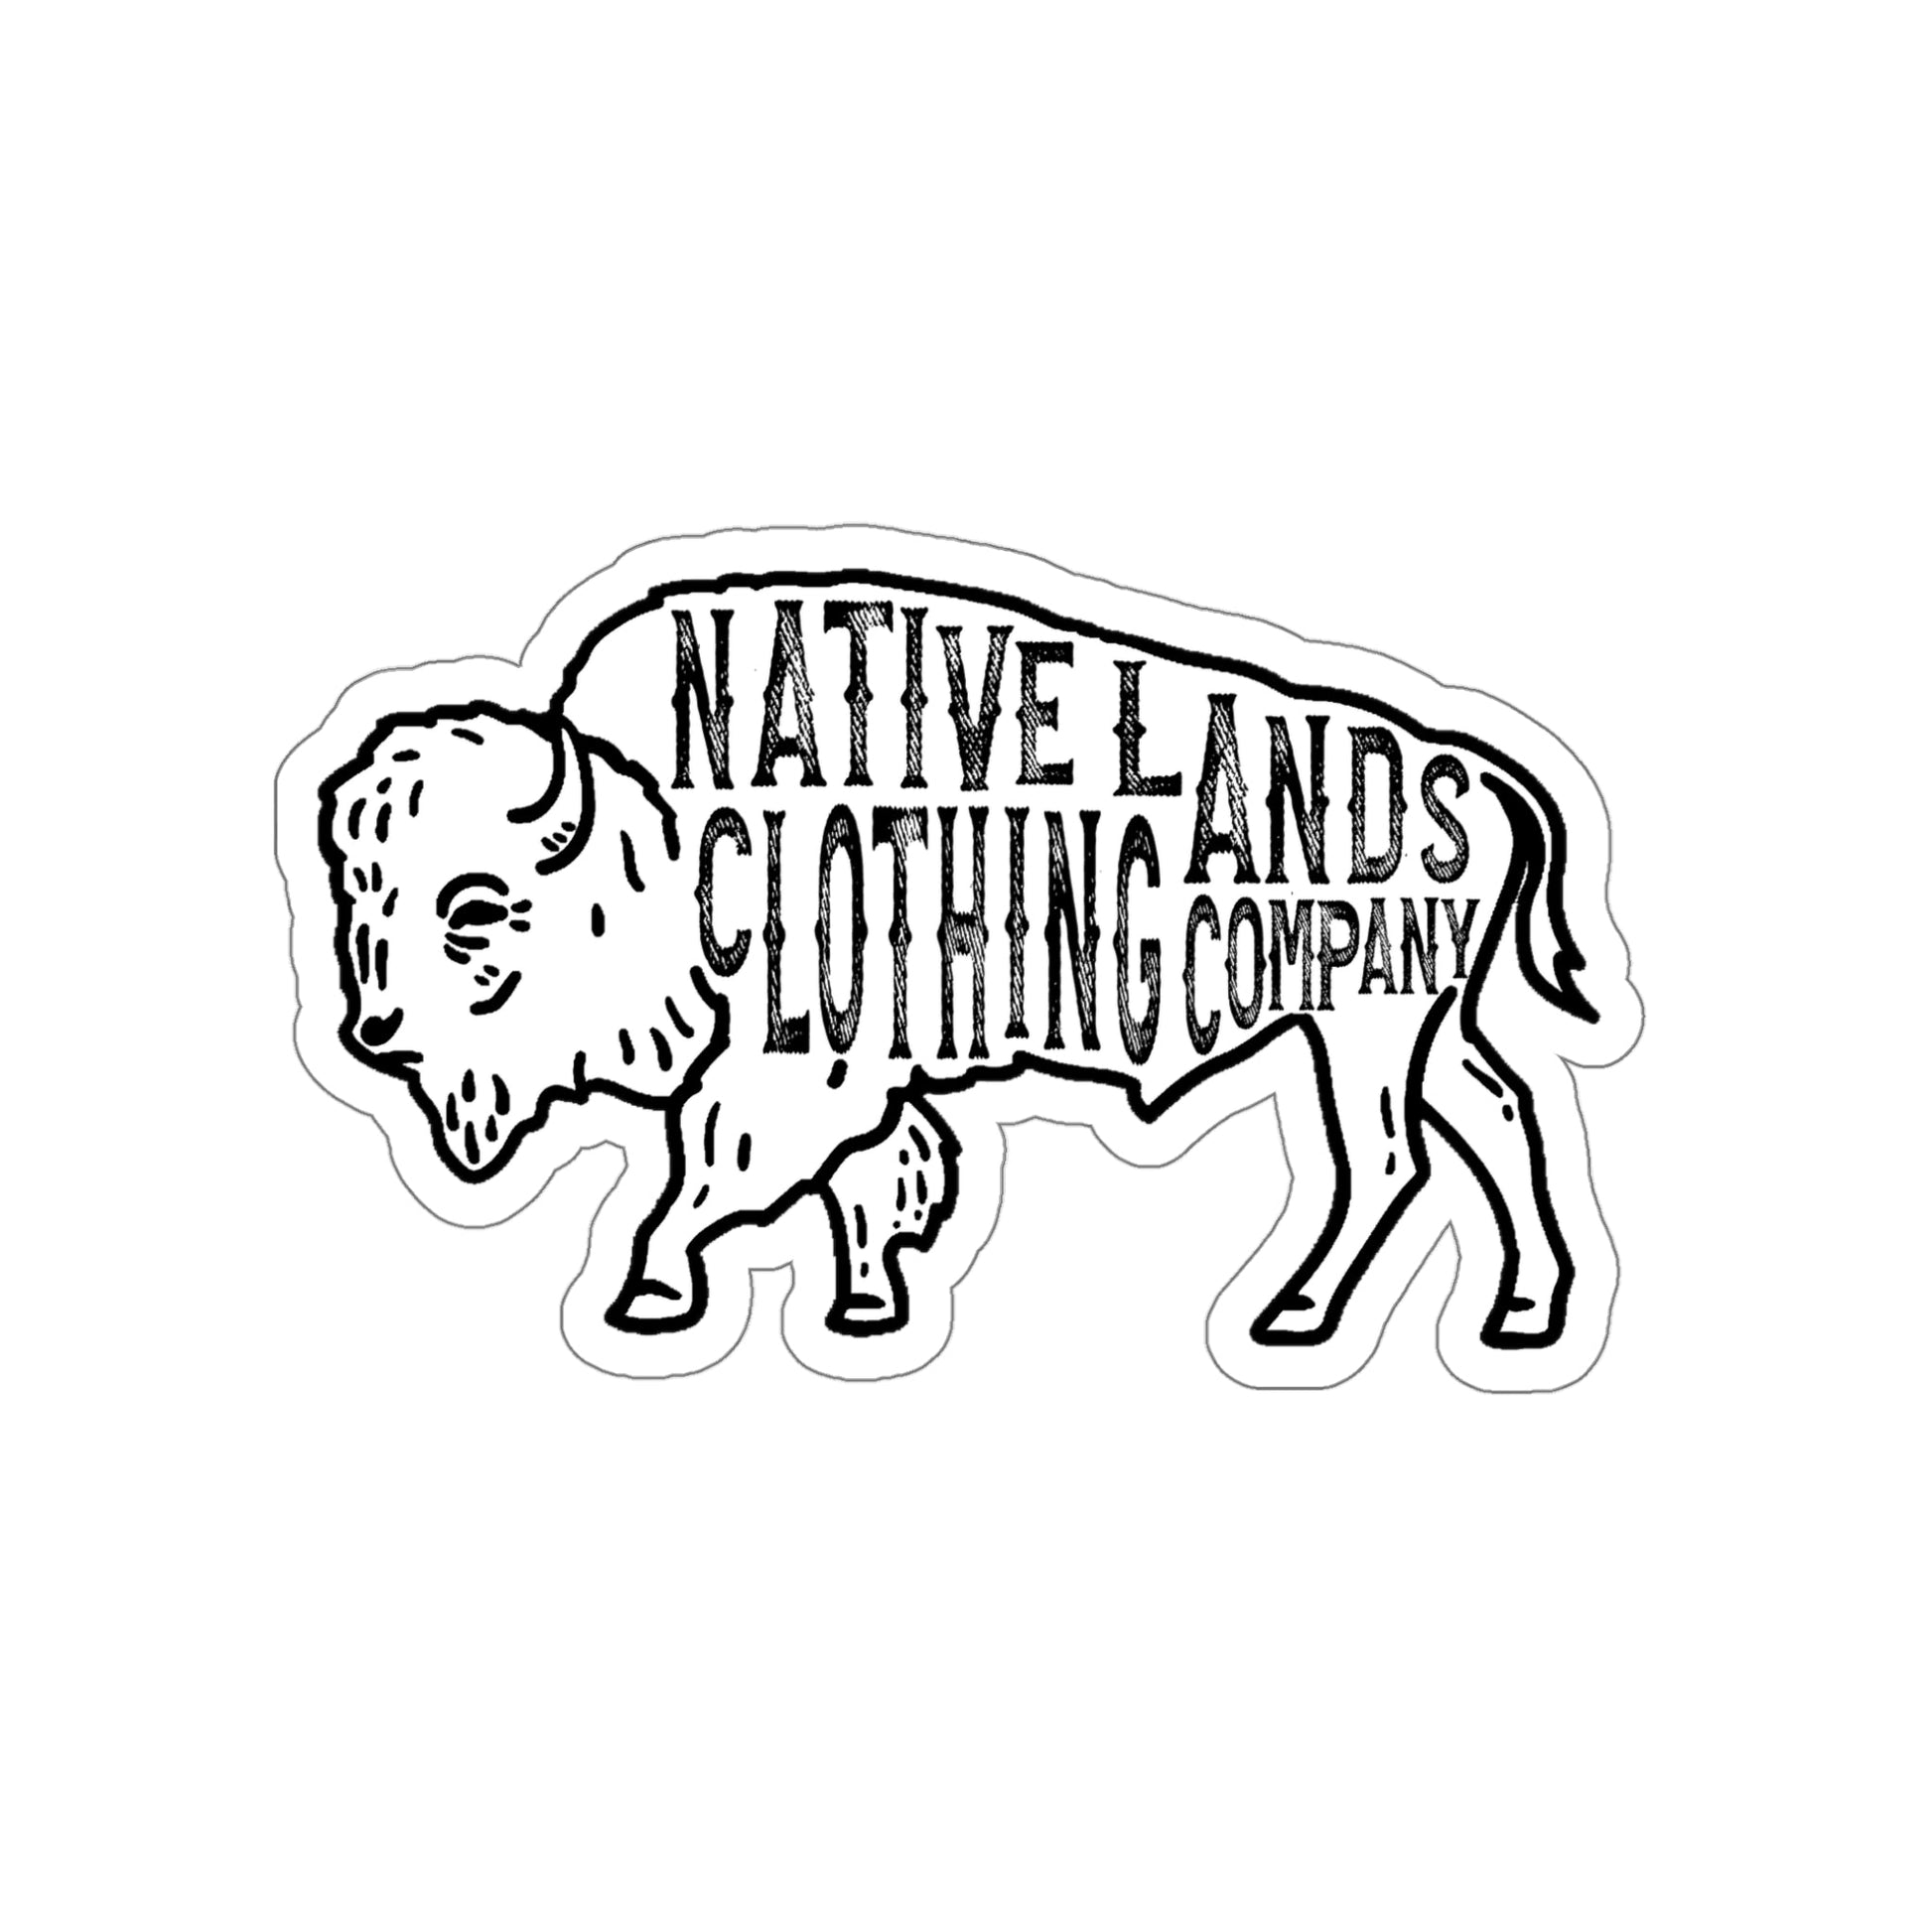 Bison Sticker Waterproof Native American (max graphic) Native Lands Clothing Company